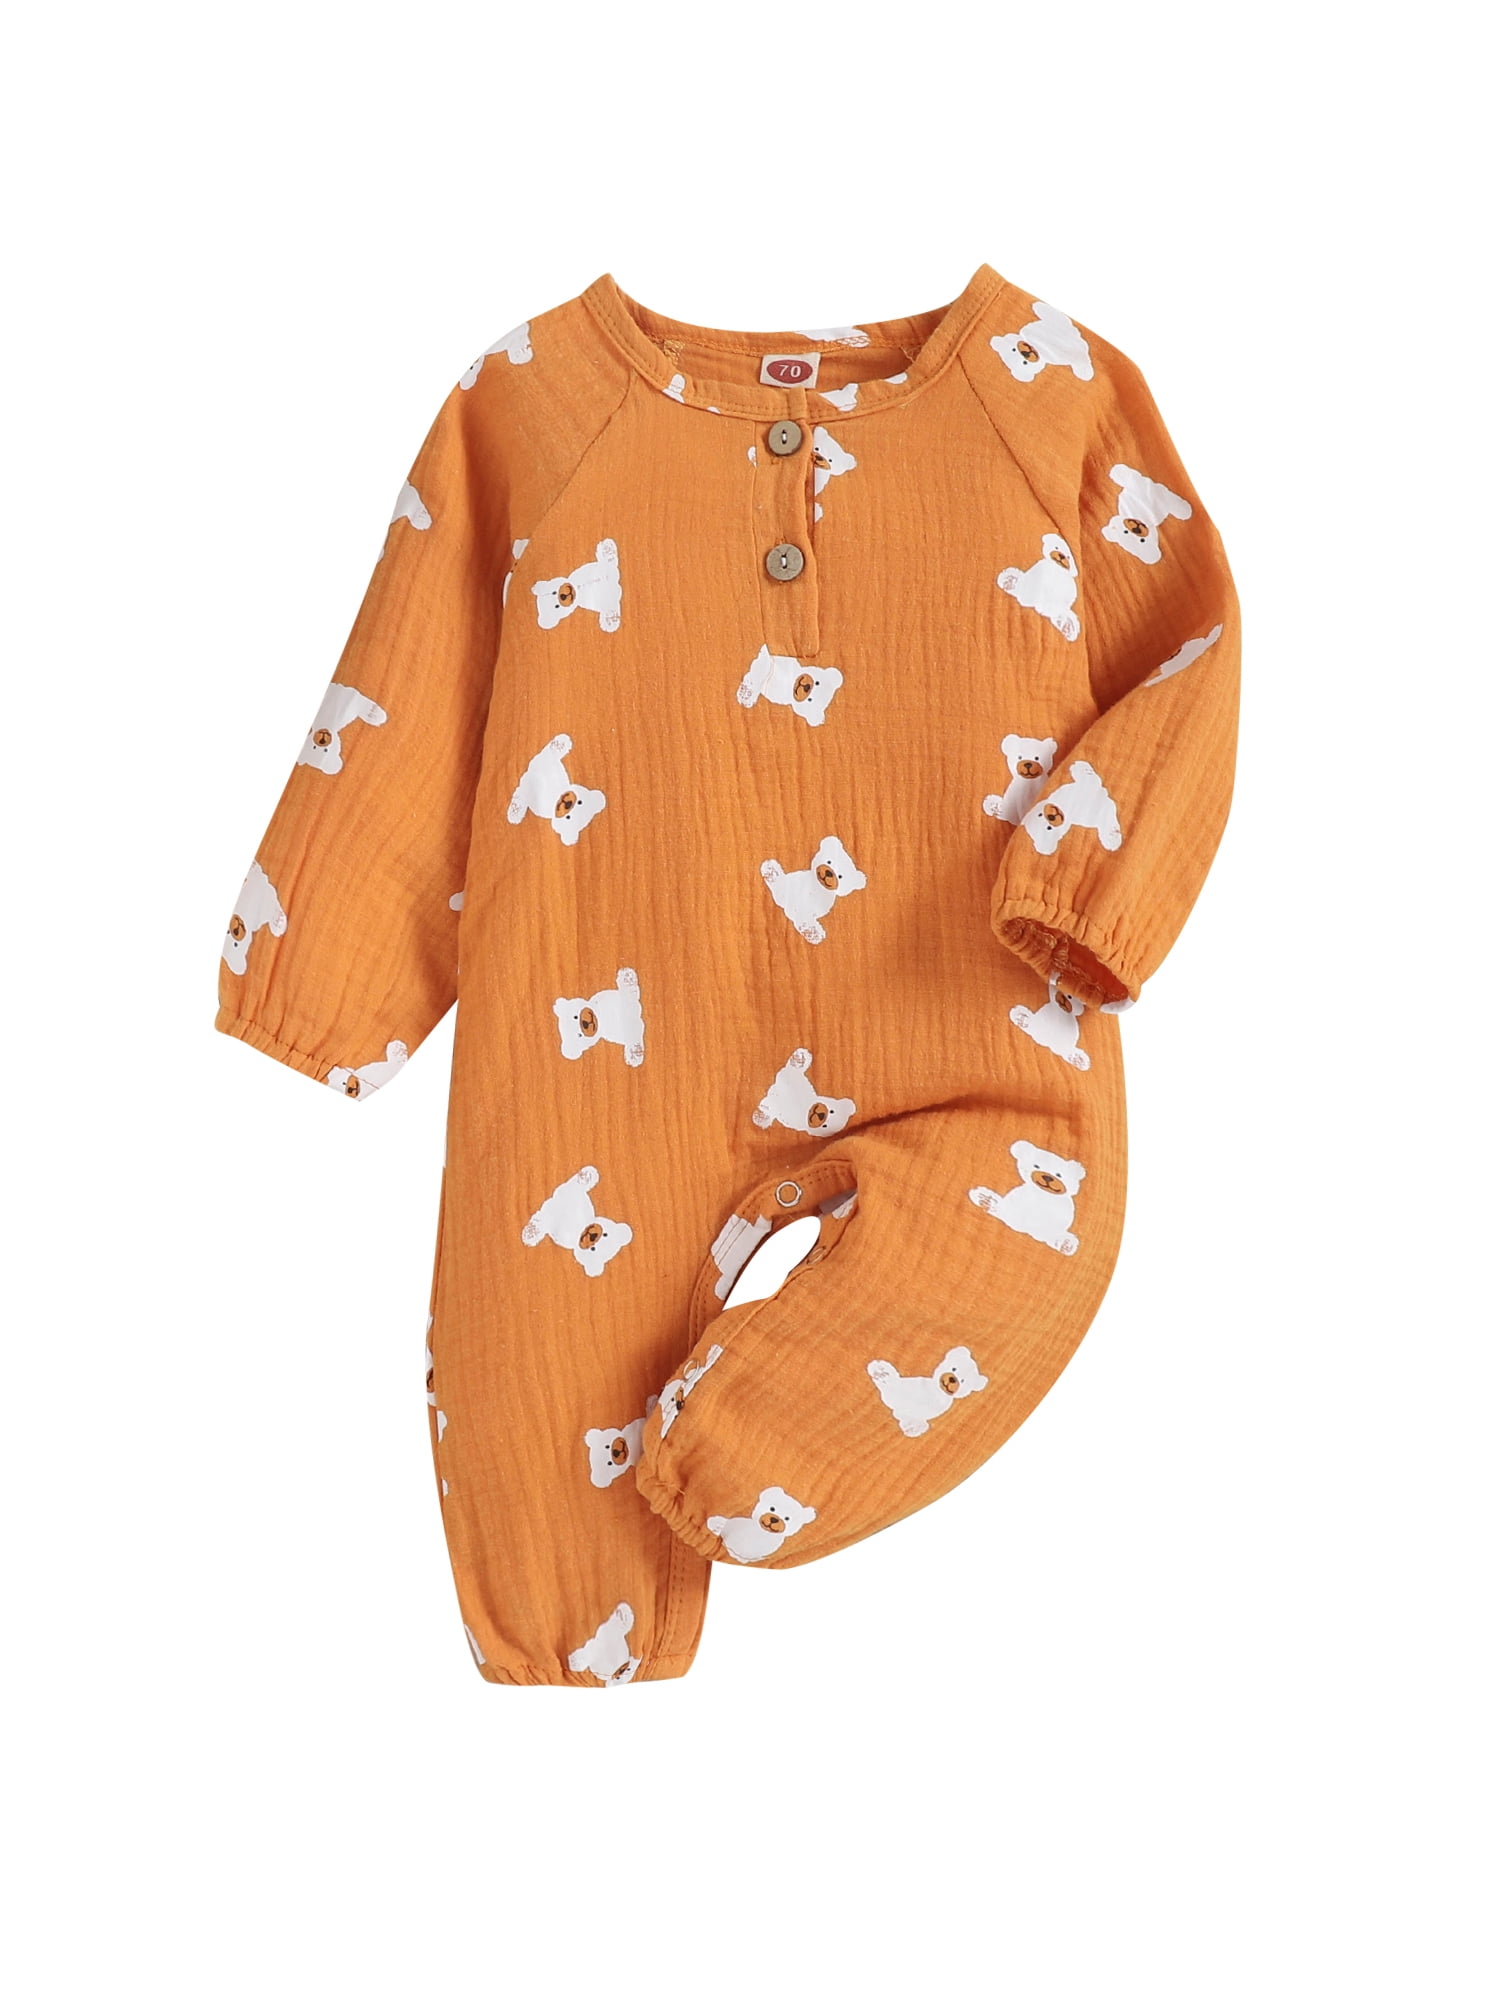 Unisex Baby Footless Rompers Solid Color Long Sleeve Cotton Jumpsuit Outfit for Newborn Kids 